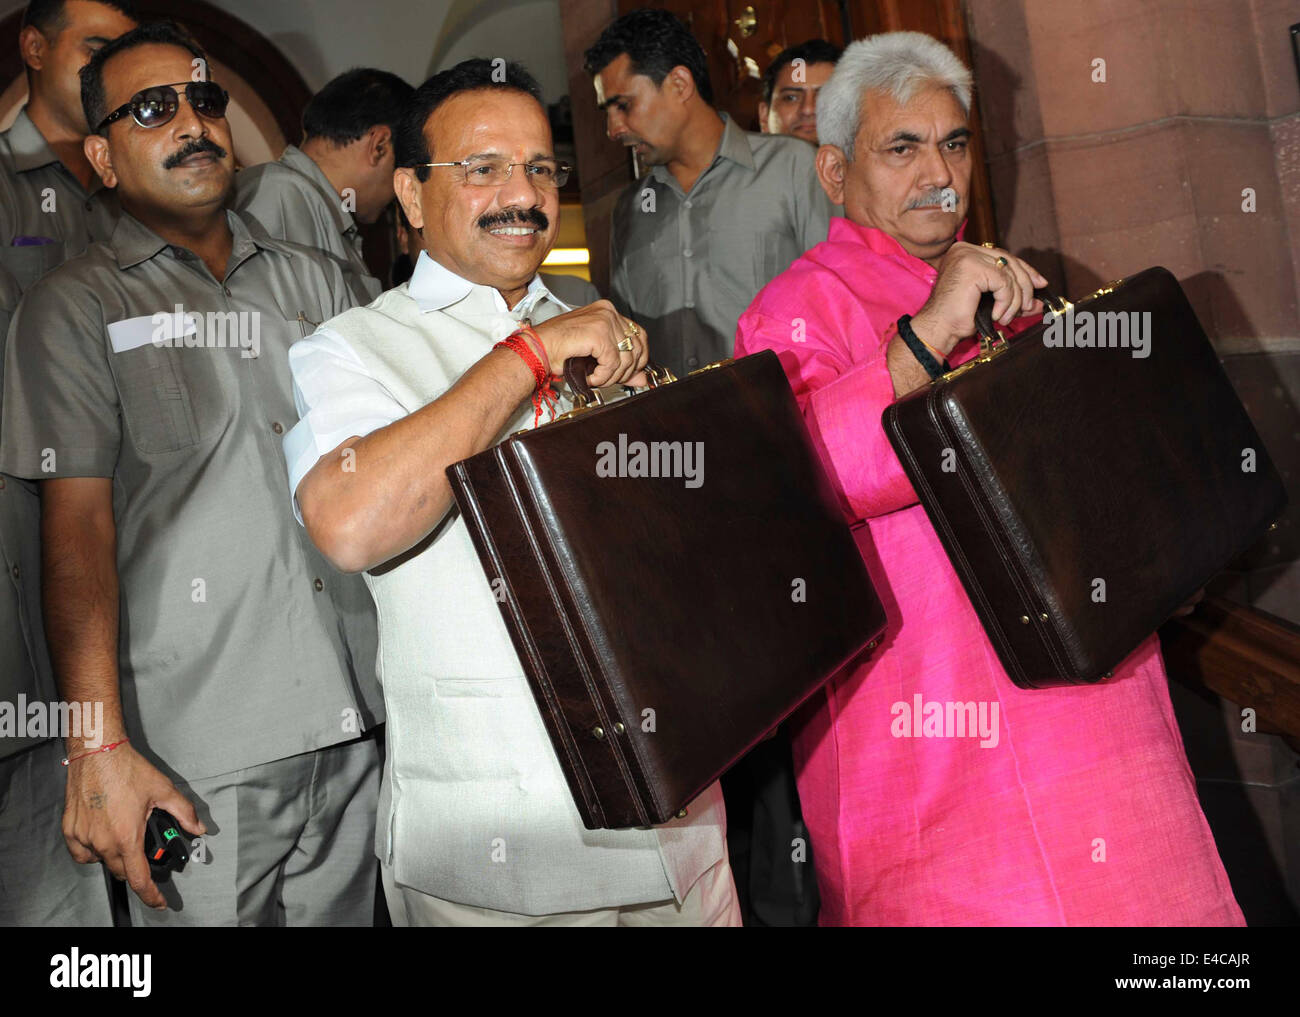 New Delhi, India. 8th July, 2014. Indian Railway Minister Sadananda Gowda (C) and his deputy Manoj Sinha (1st R) are seen at the gate of Parliament House to present the railway budget for the 2014-15 fiscal year in New Delhi, India, July 8, 2014. Credit:  Xinhua/Alamy Live News Stock Photo